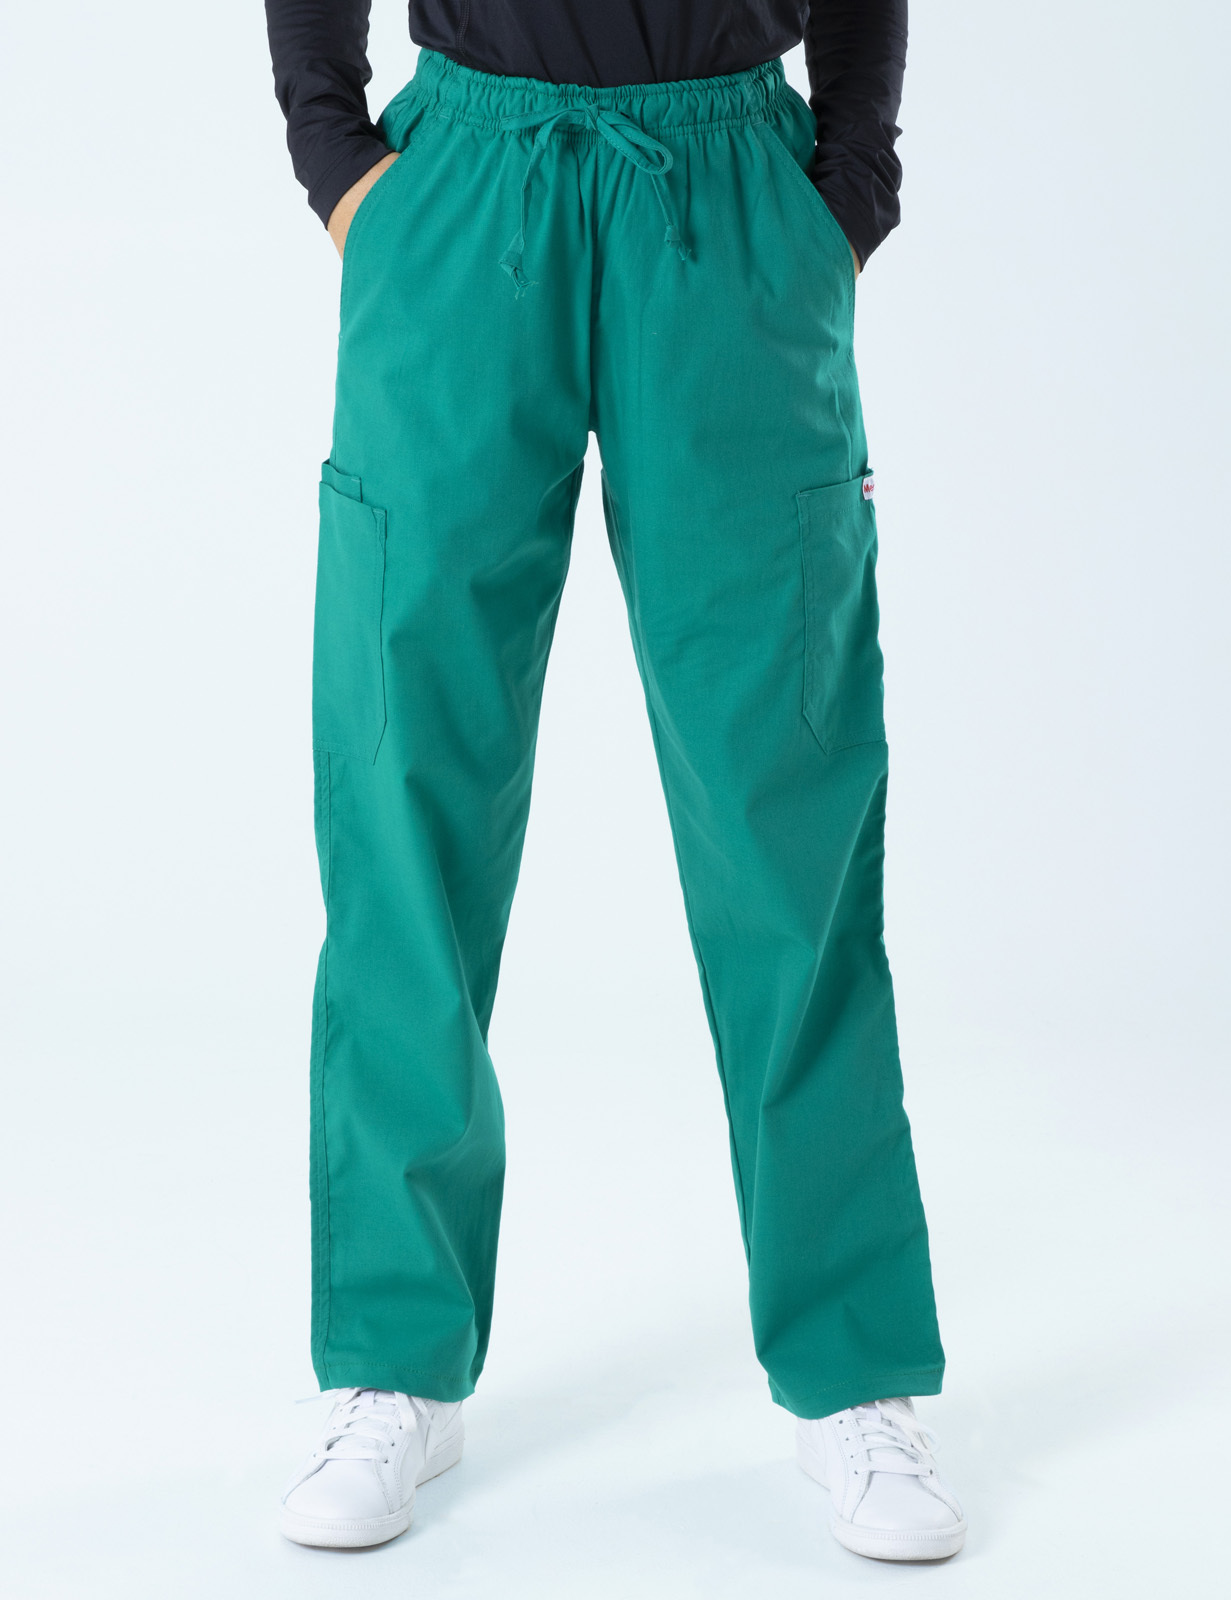 RBWH - EdtcRN (Women's Fit Spandex Scrub Top and Cargo Pants in Hunter incl Logos)